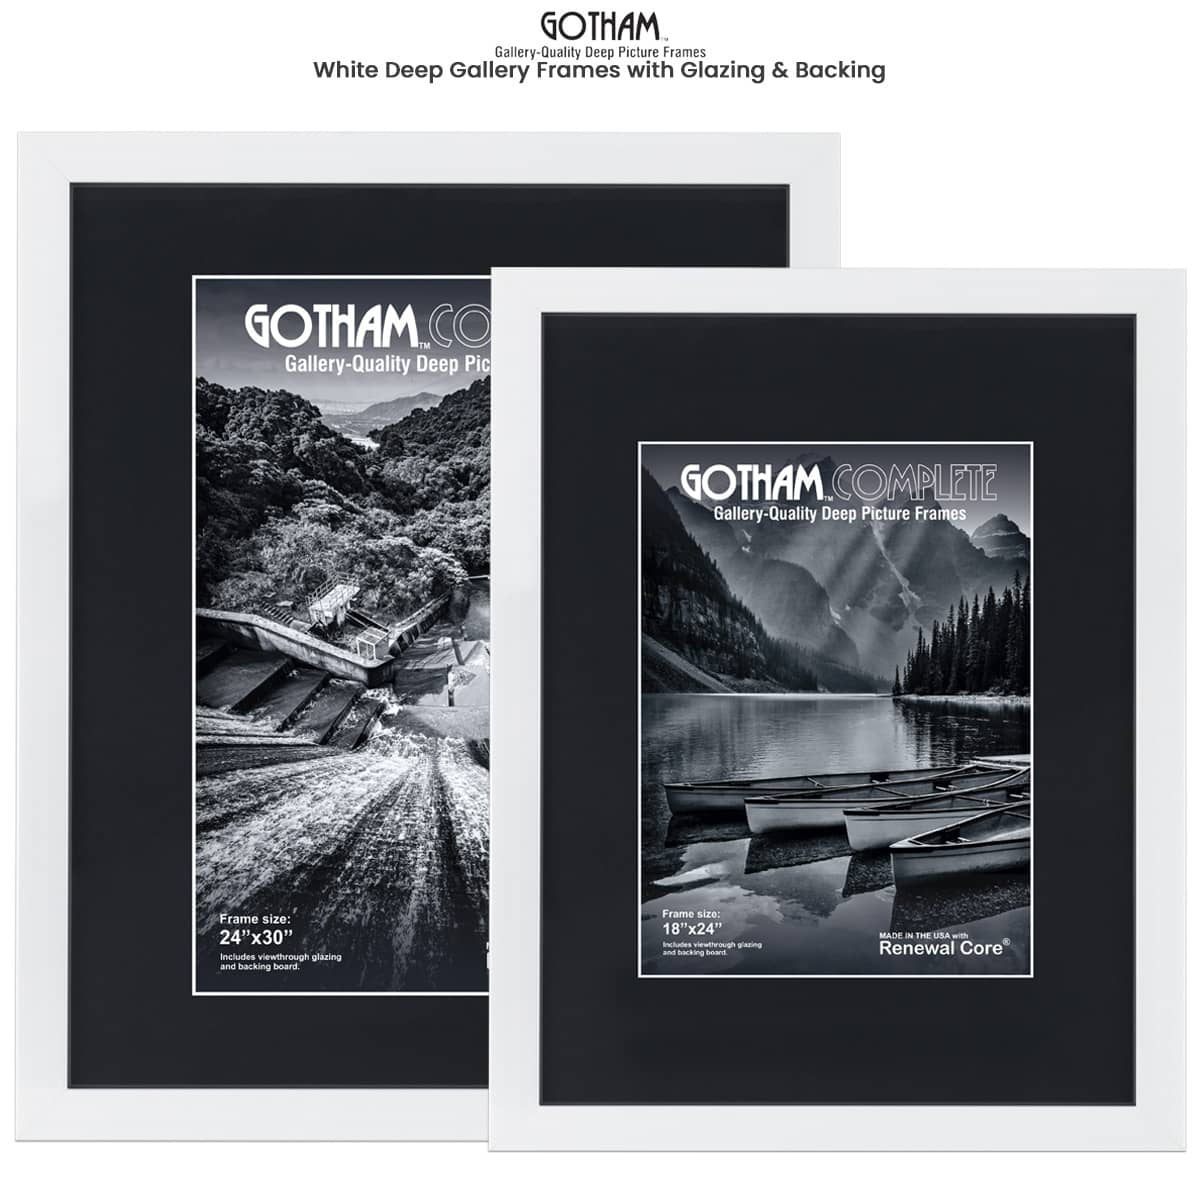 Gotham White Deep Gallery Frames With Glazing Backing